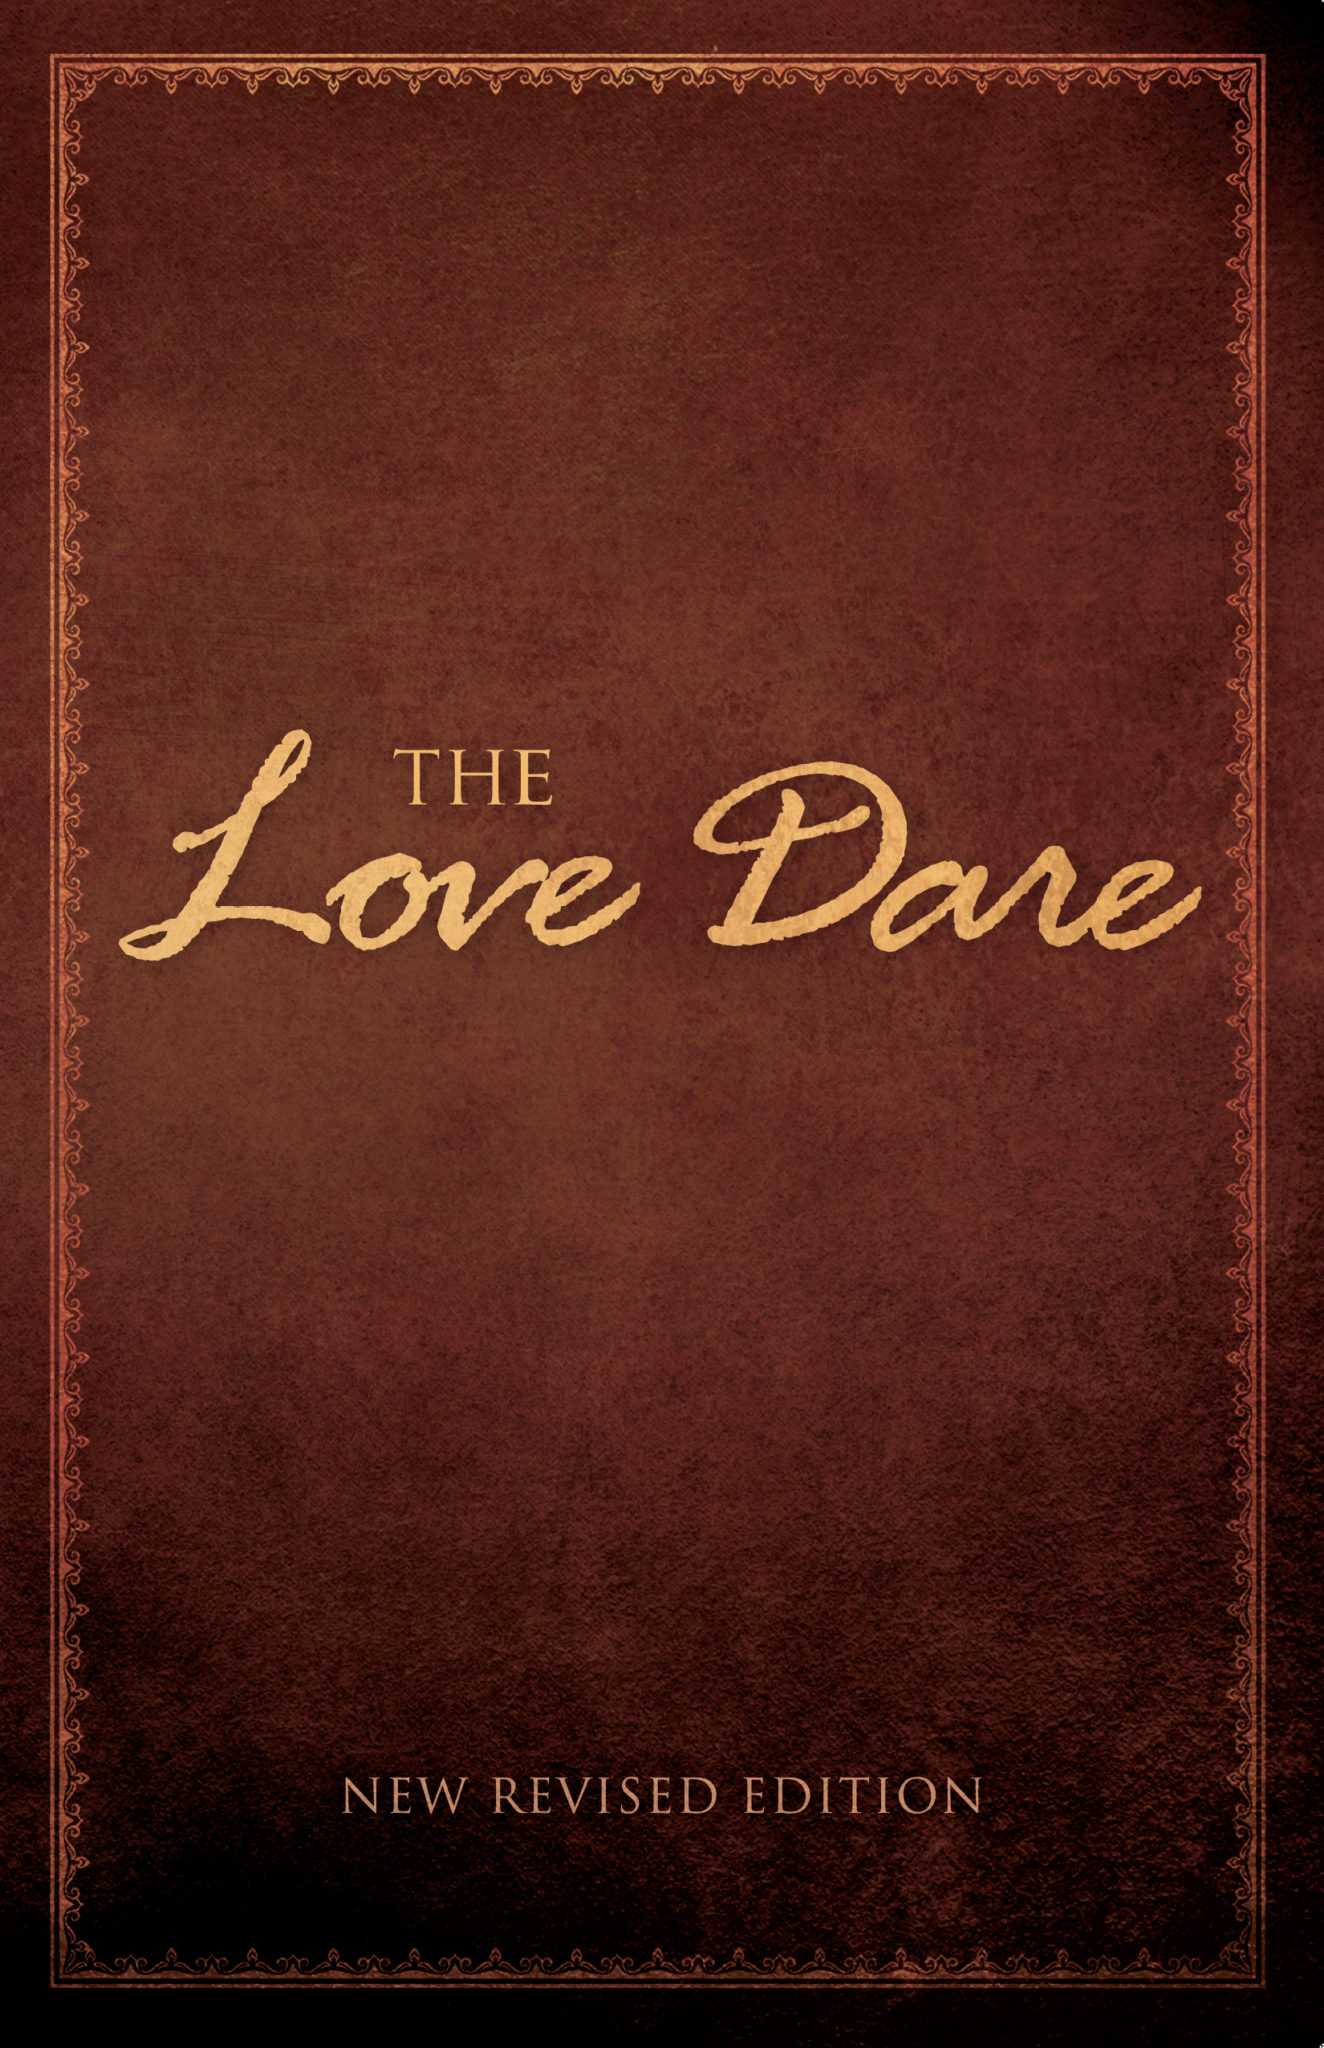 “The Love Dare” featured on “USA Today” bestseller list, continues to